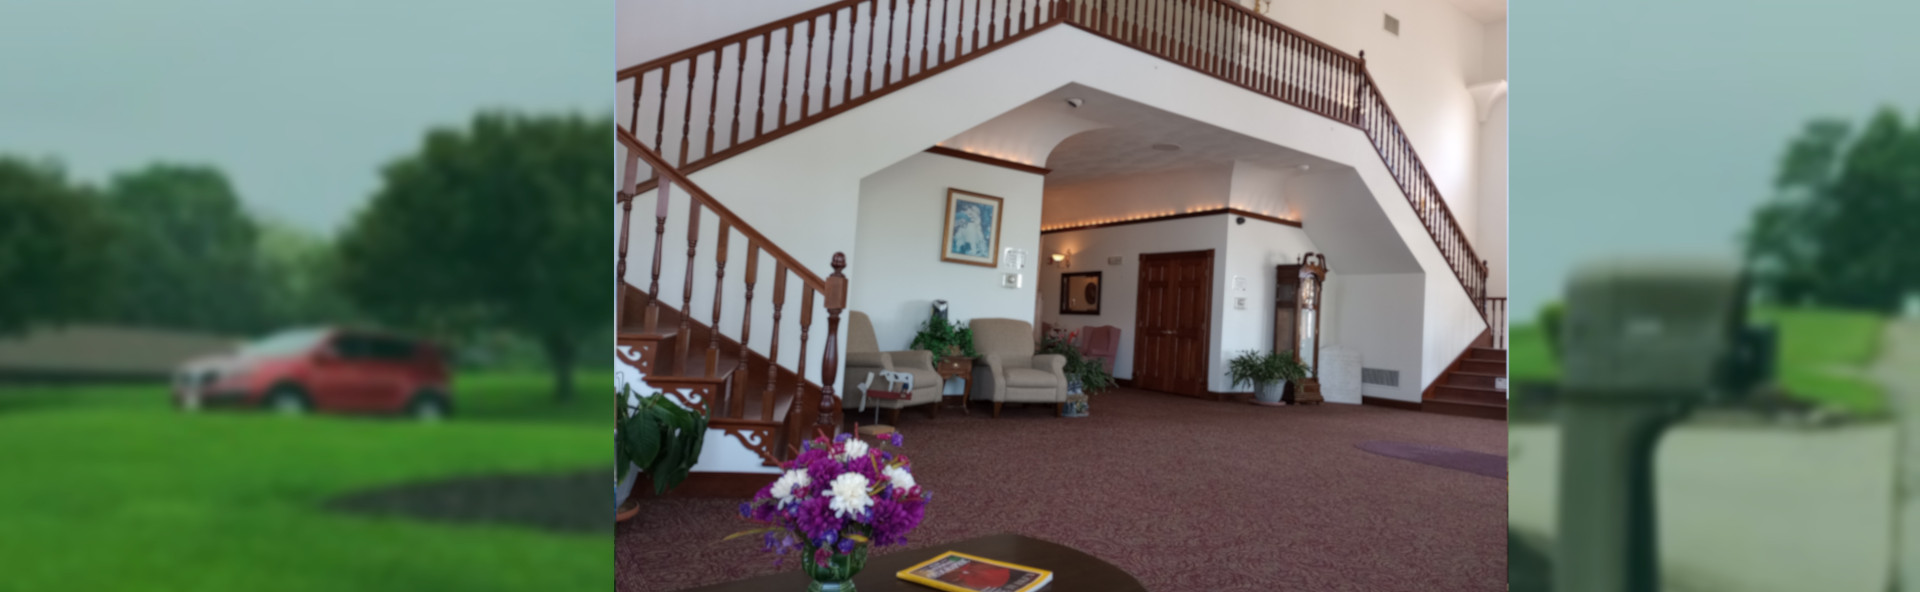 rose haven personal care home